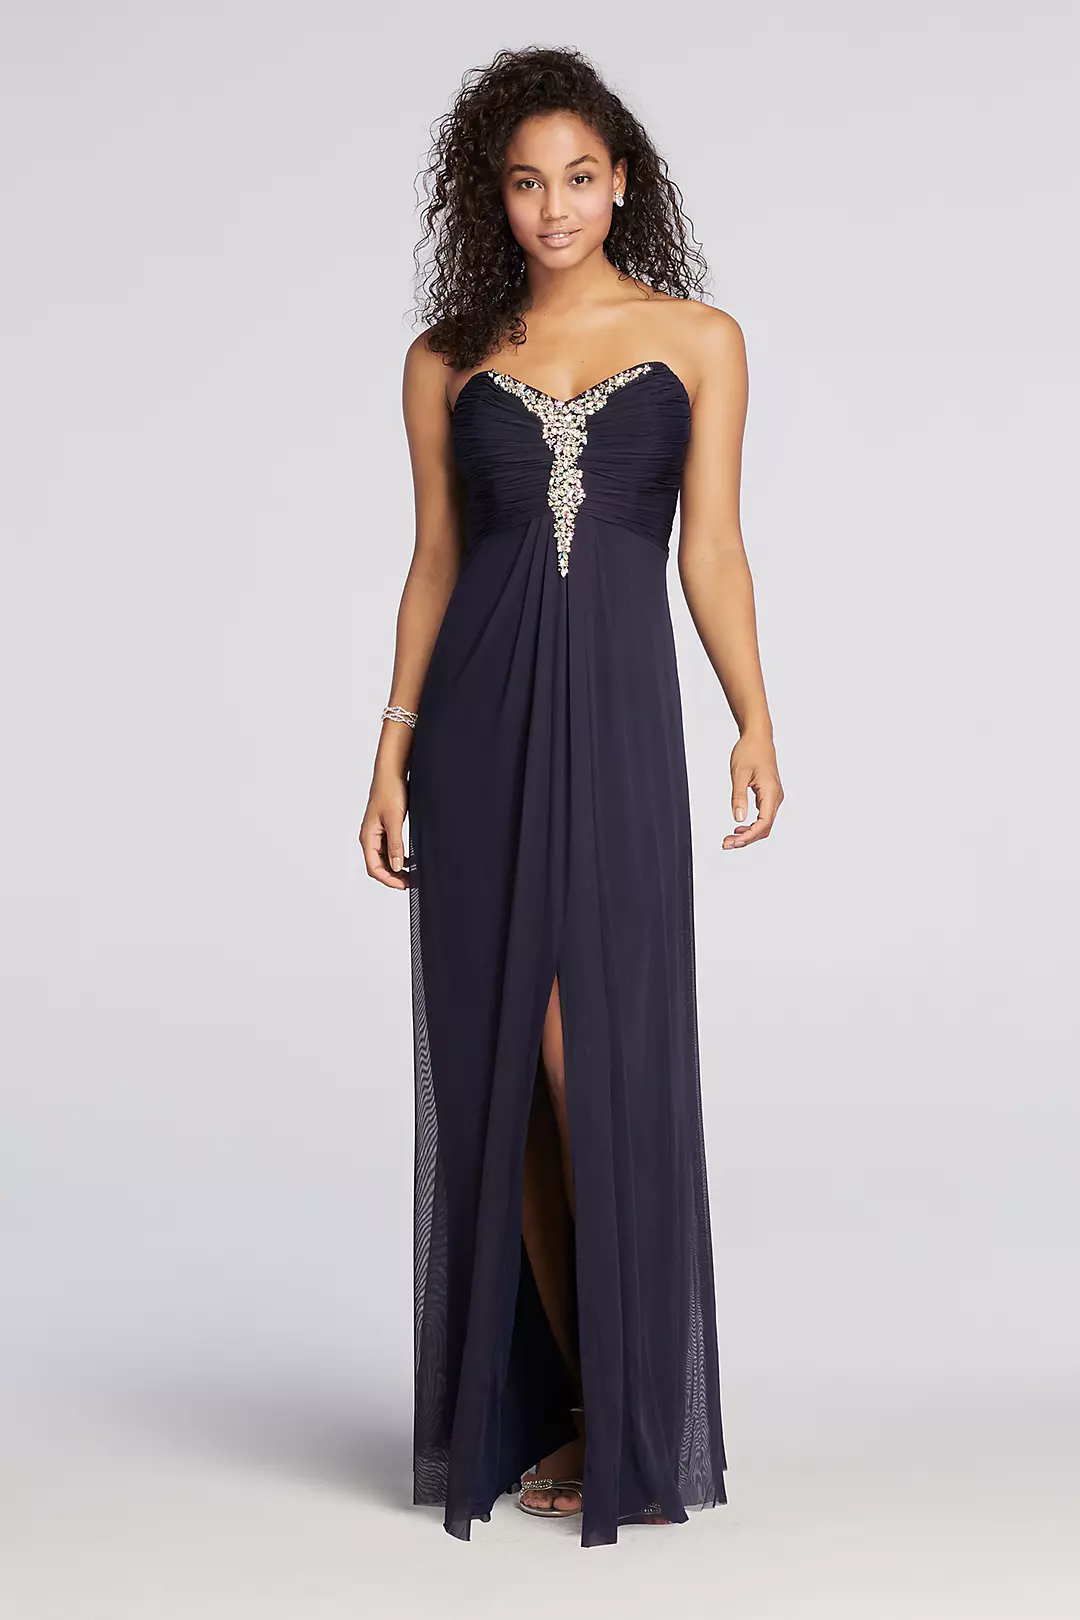 Strapless Mesh Prom Dress with Beaded Neckline Image